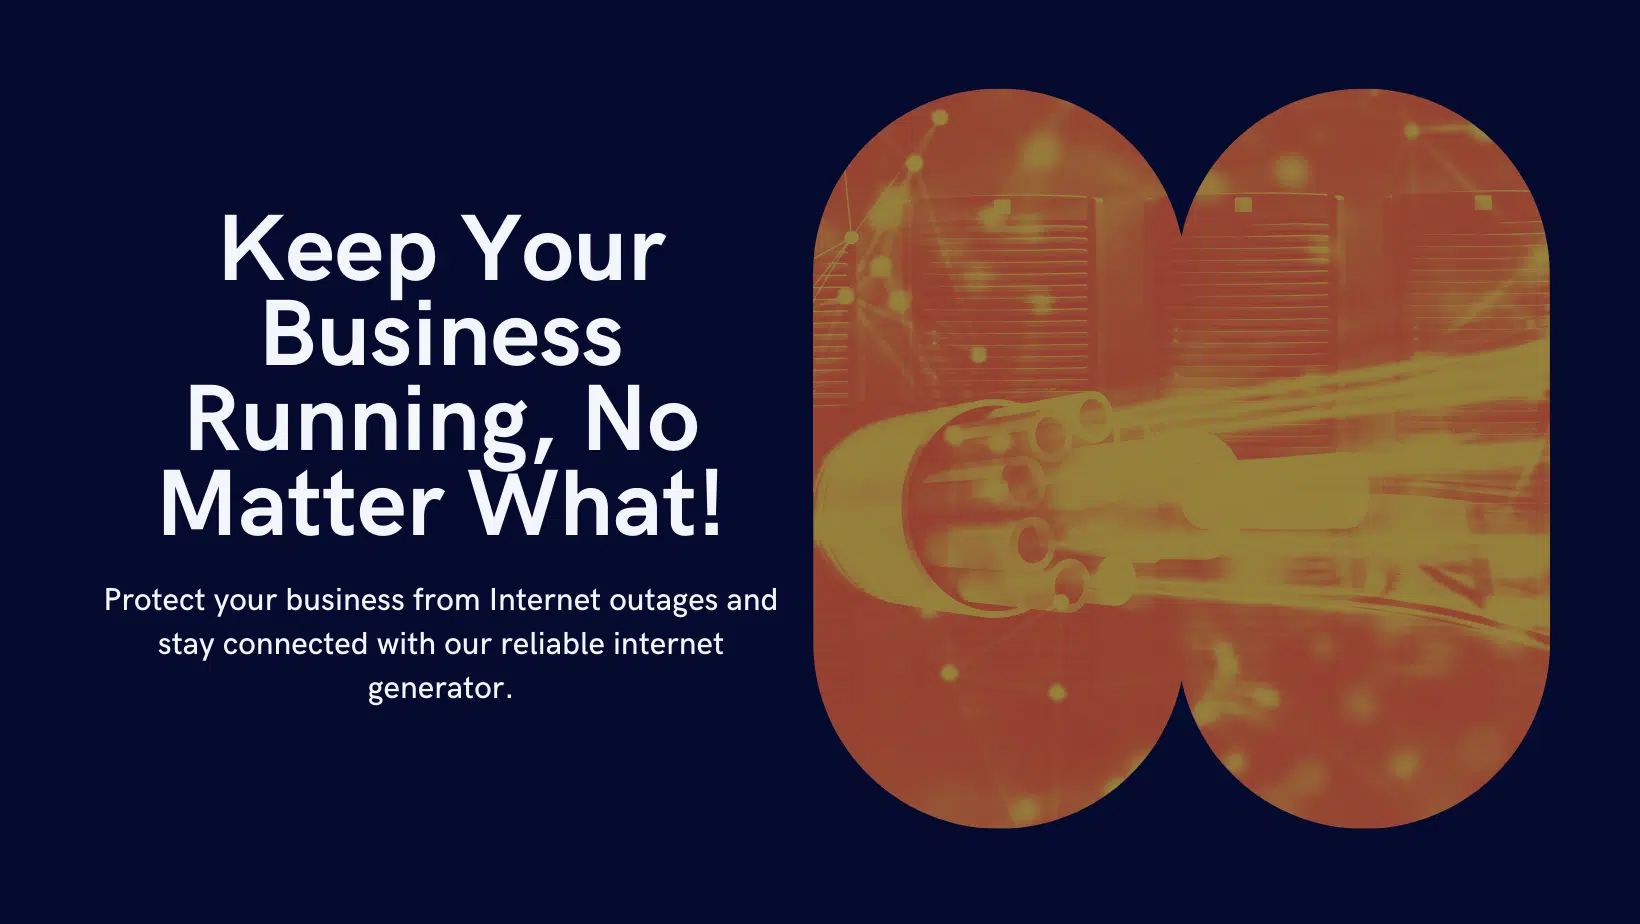 Protect your business from Internet outages and stay connected with our reliable Internet generator